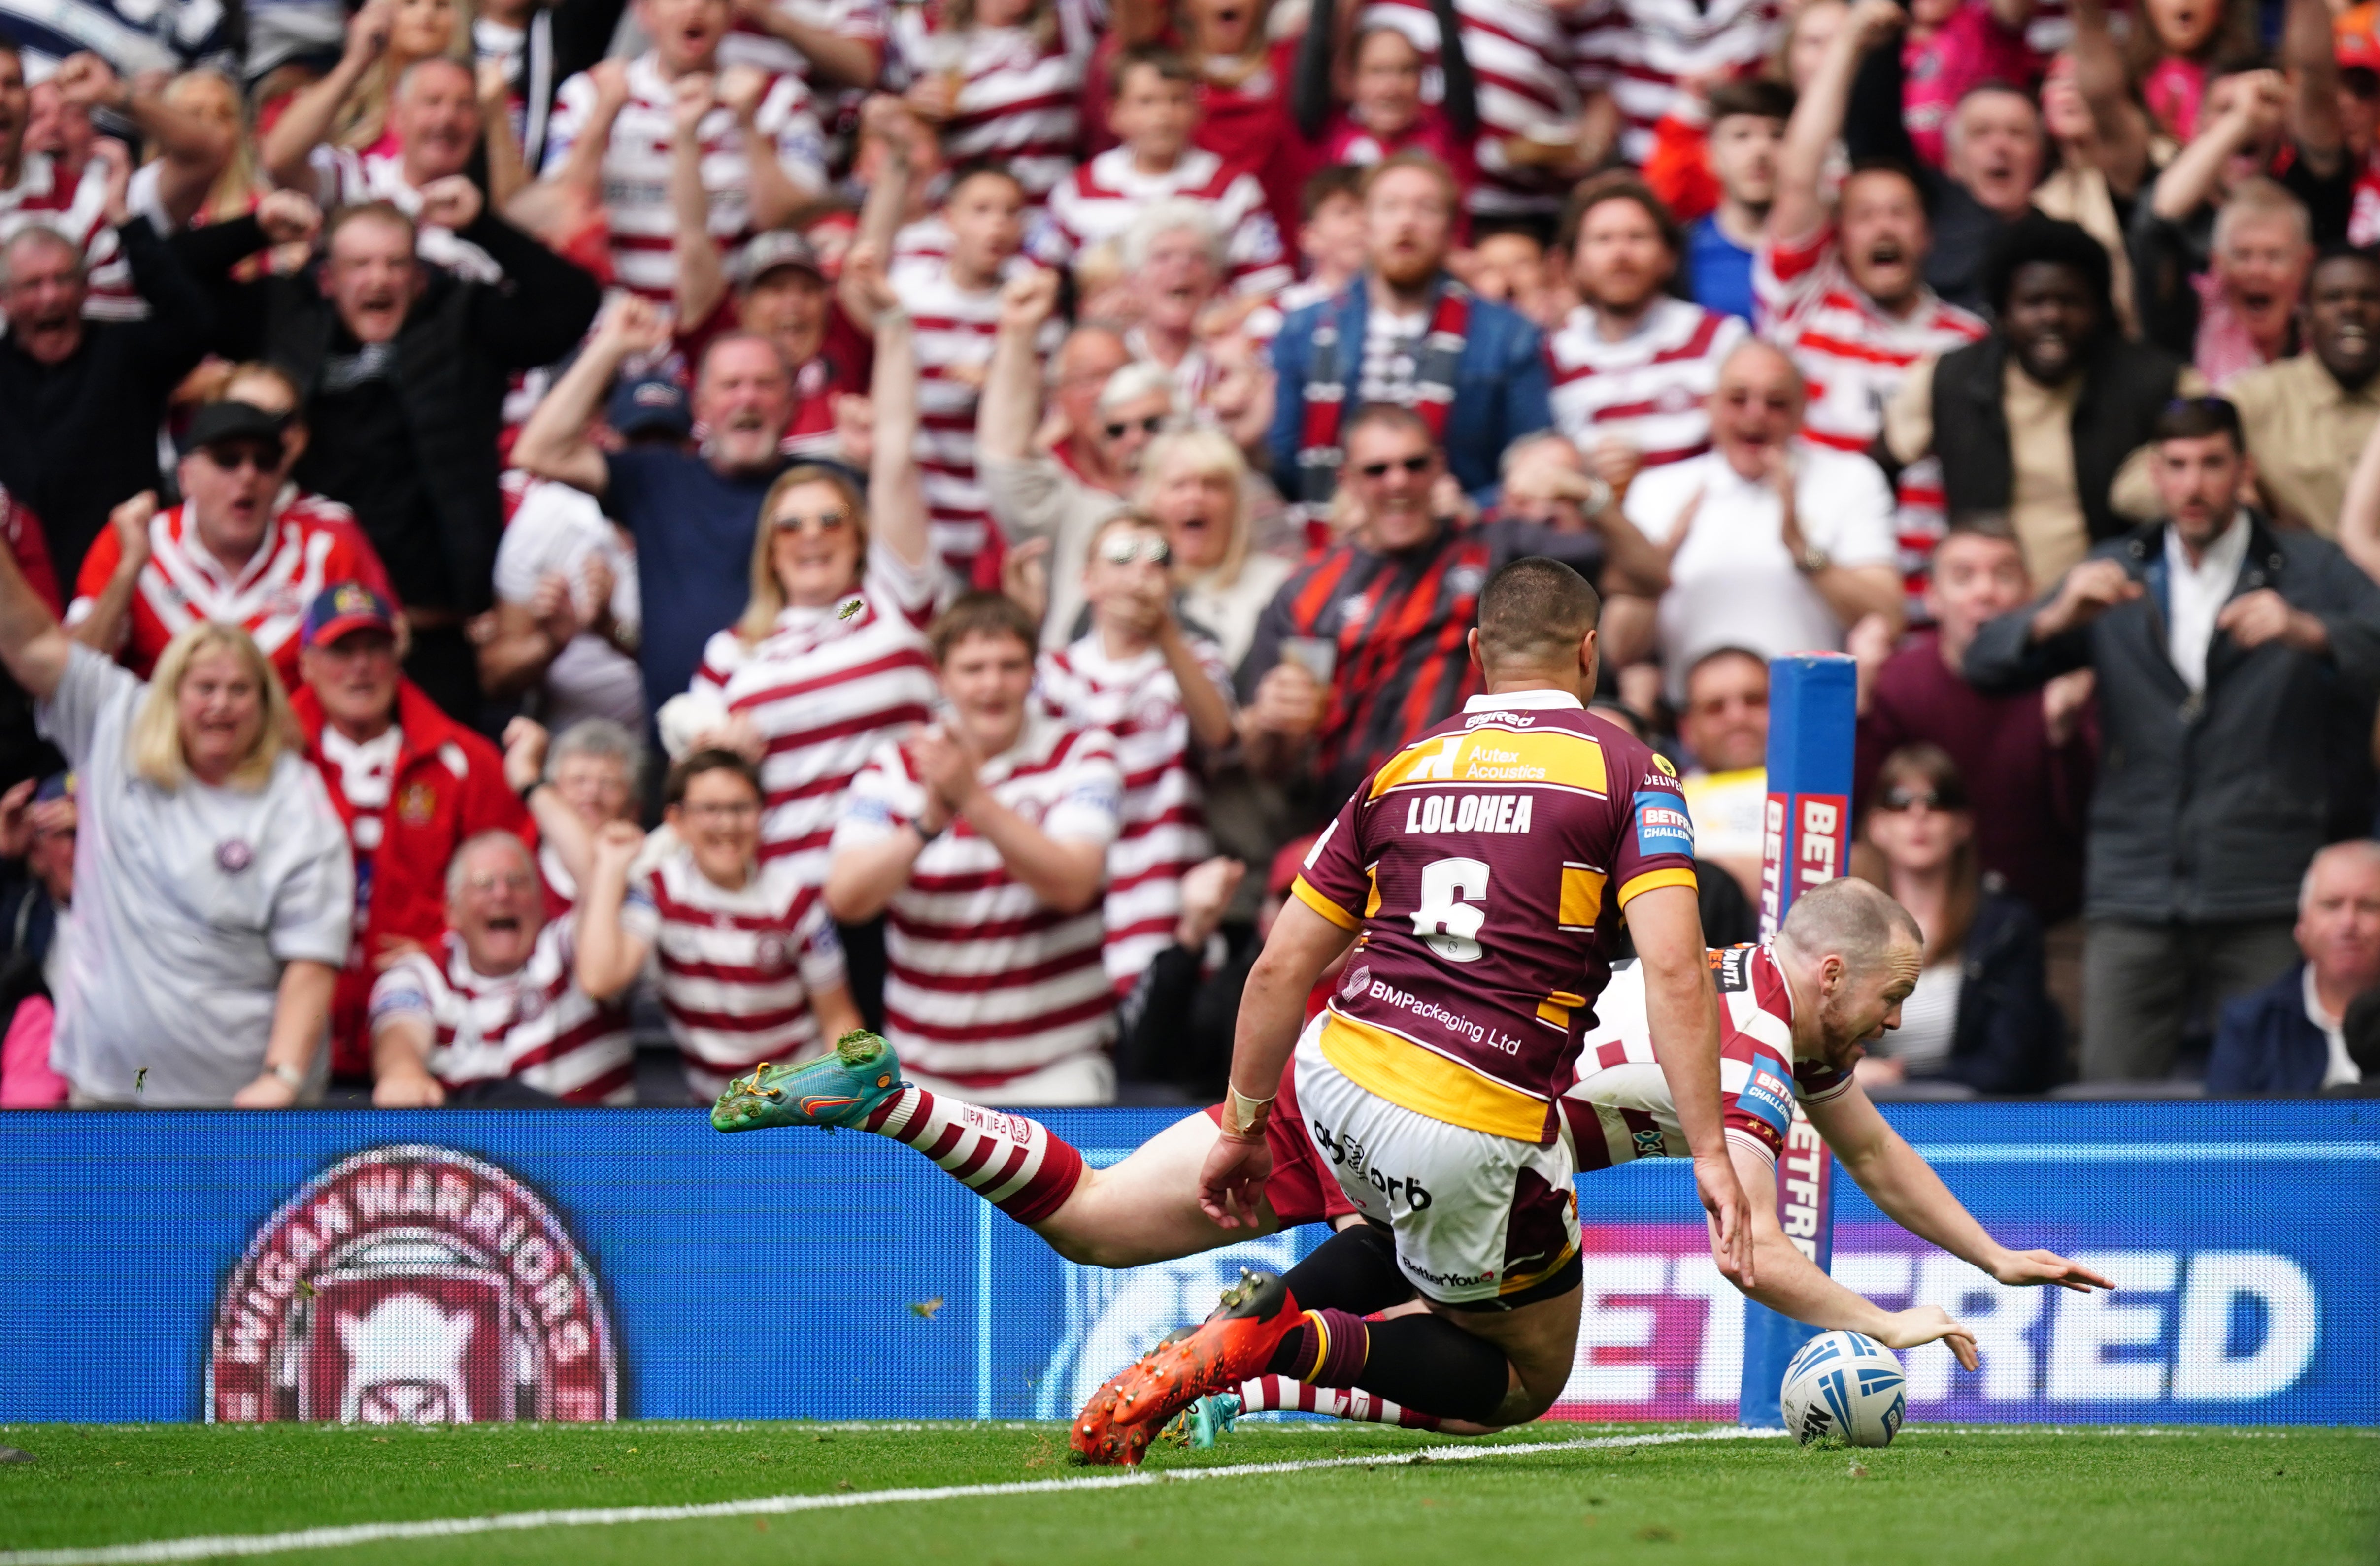 Wigan’s Liam Marshall scores the decisive try to see off Huddersfield in the Betfred Challenge Cup final at the Tottenham Hotspur Stadium (Mike Egerton/PA)